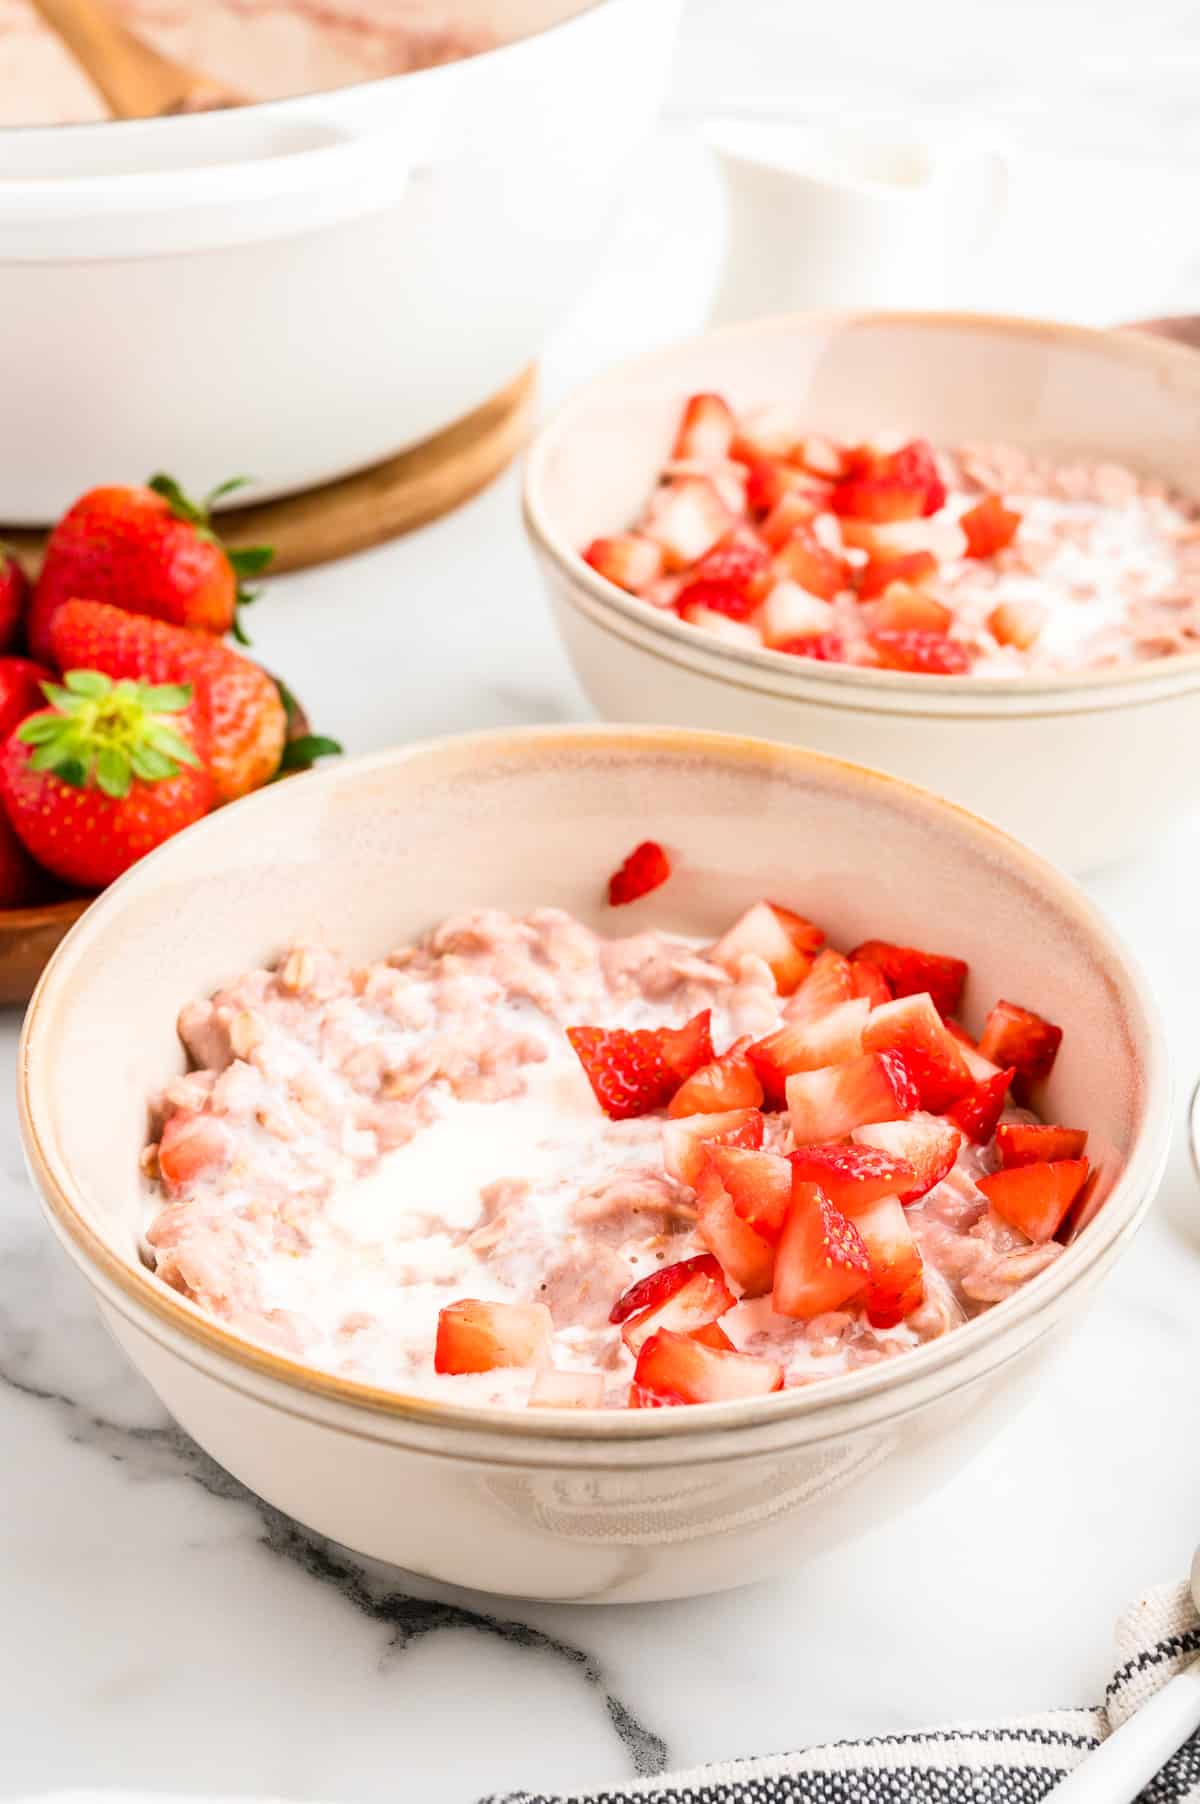 Two bowls of the Strawberry Oatmeal topped with diced strawberries and heavy cream.